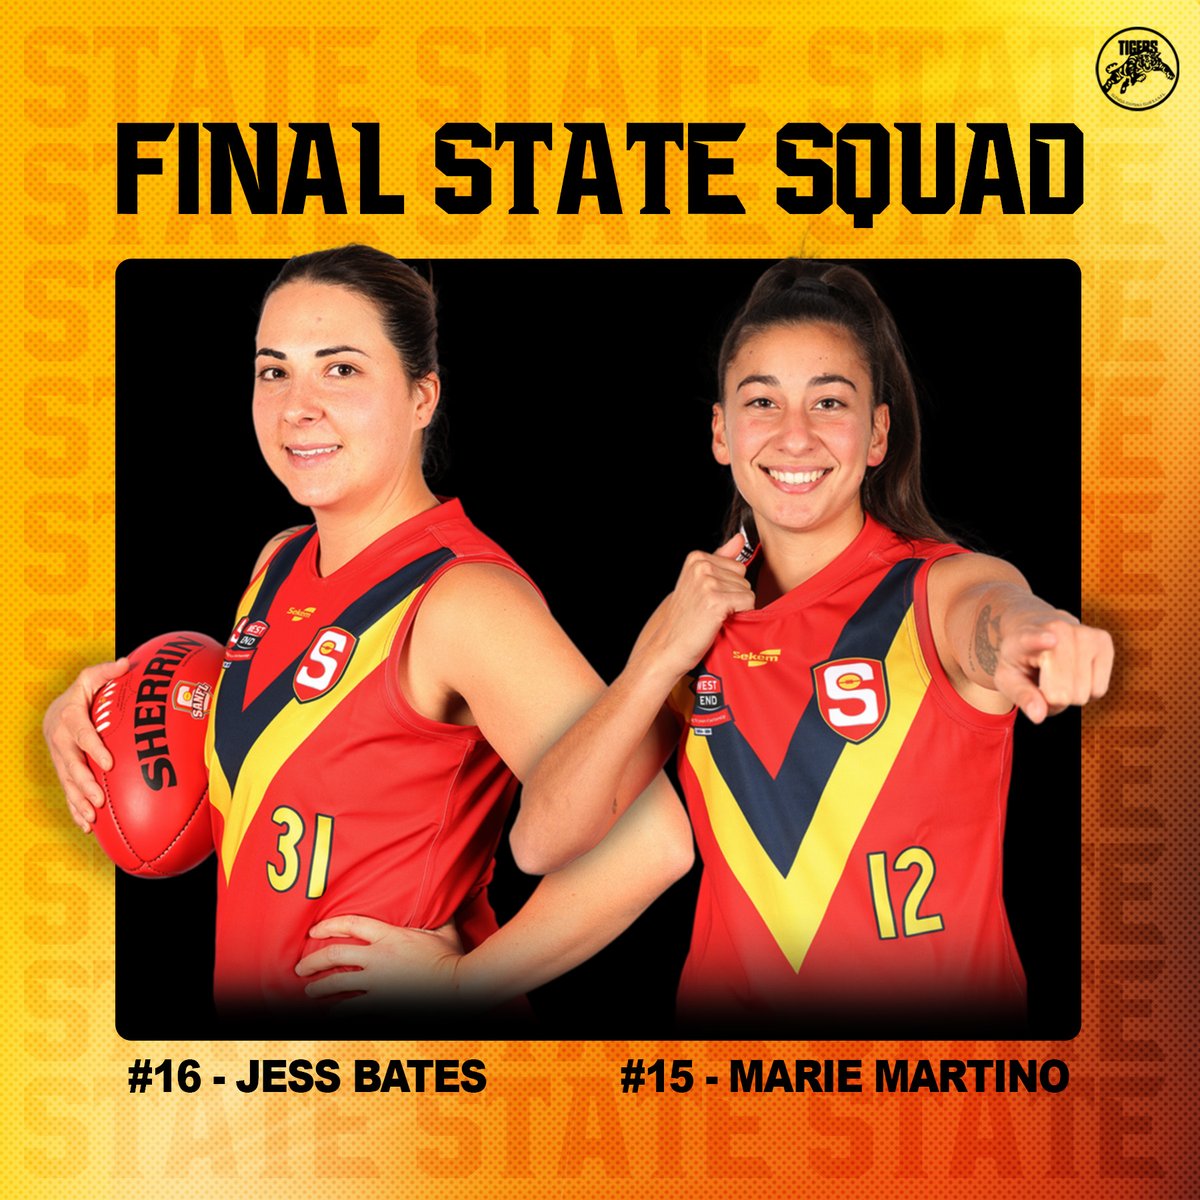 Sam Franson will Captain the SANFLW State Team this weekend in Perth against the WAFLW!
Marie Martino & Jess Bates will be alongside Sammy showing the West Coast how the Tigers do it🐯
You can read more here: bit.ly/3UCHBvL
Congratulations Girls, we're all behind you! 😤